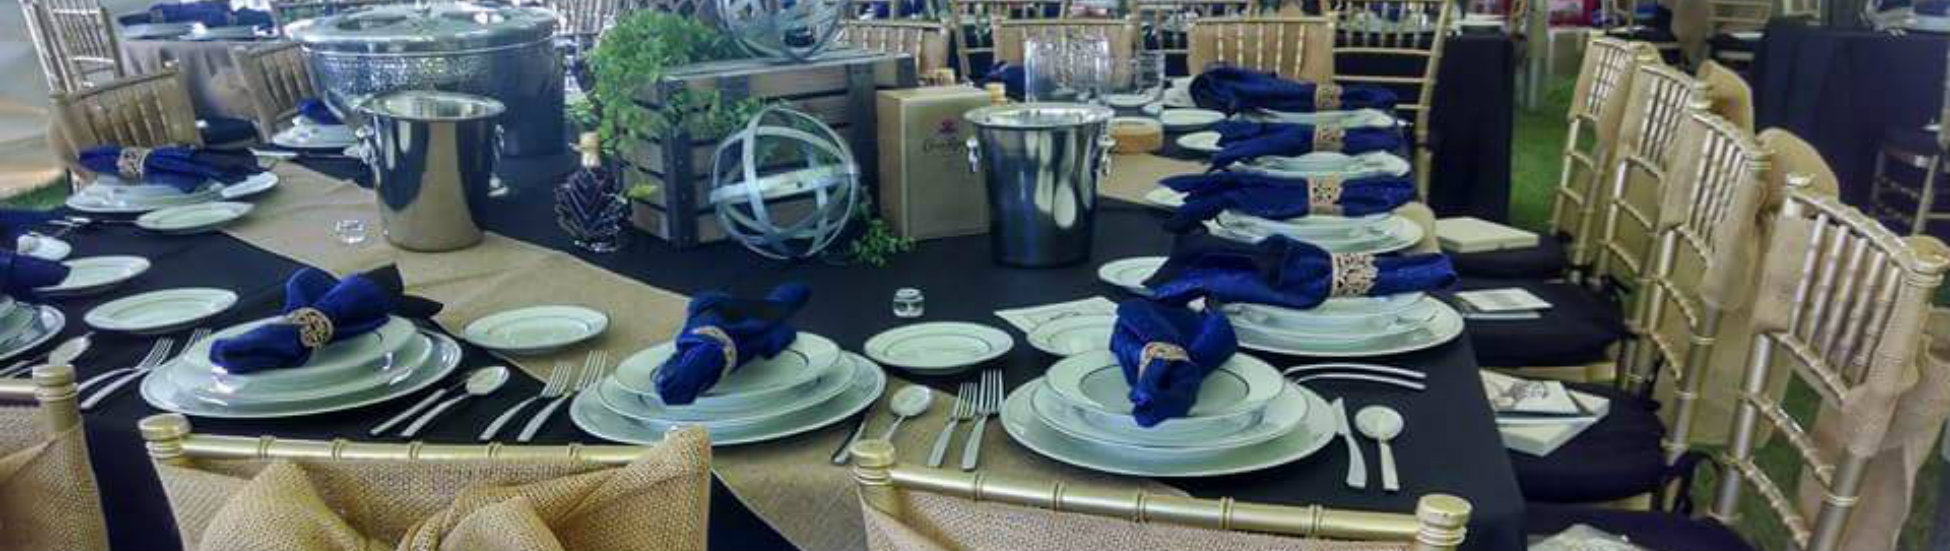 Table settings and dishware for large events.